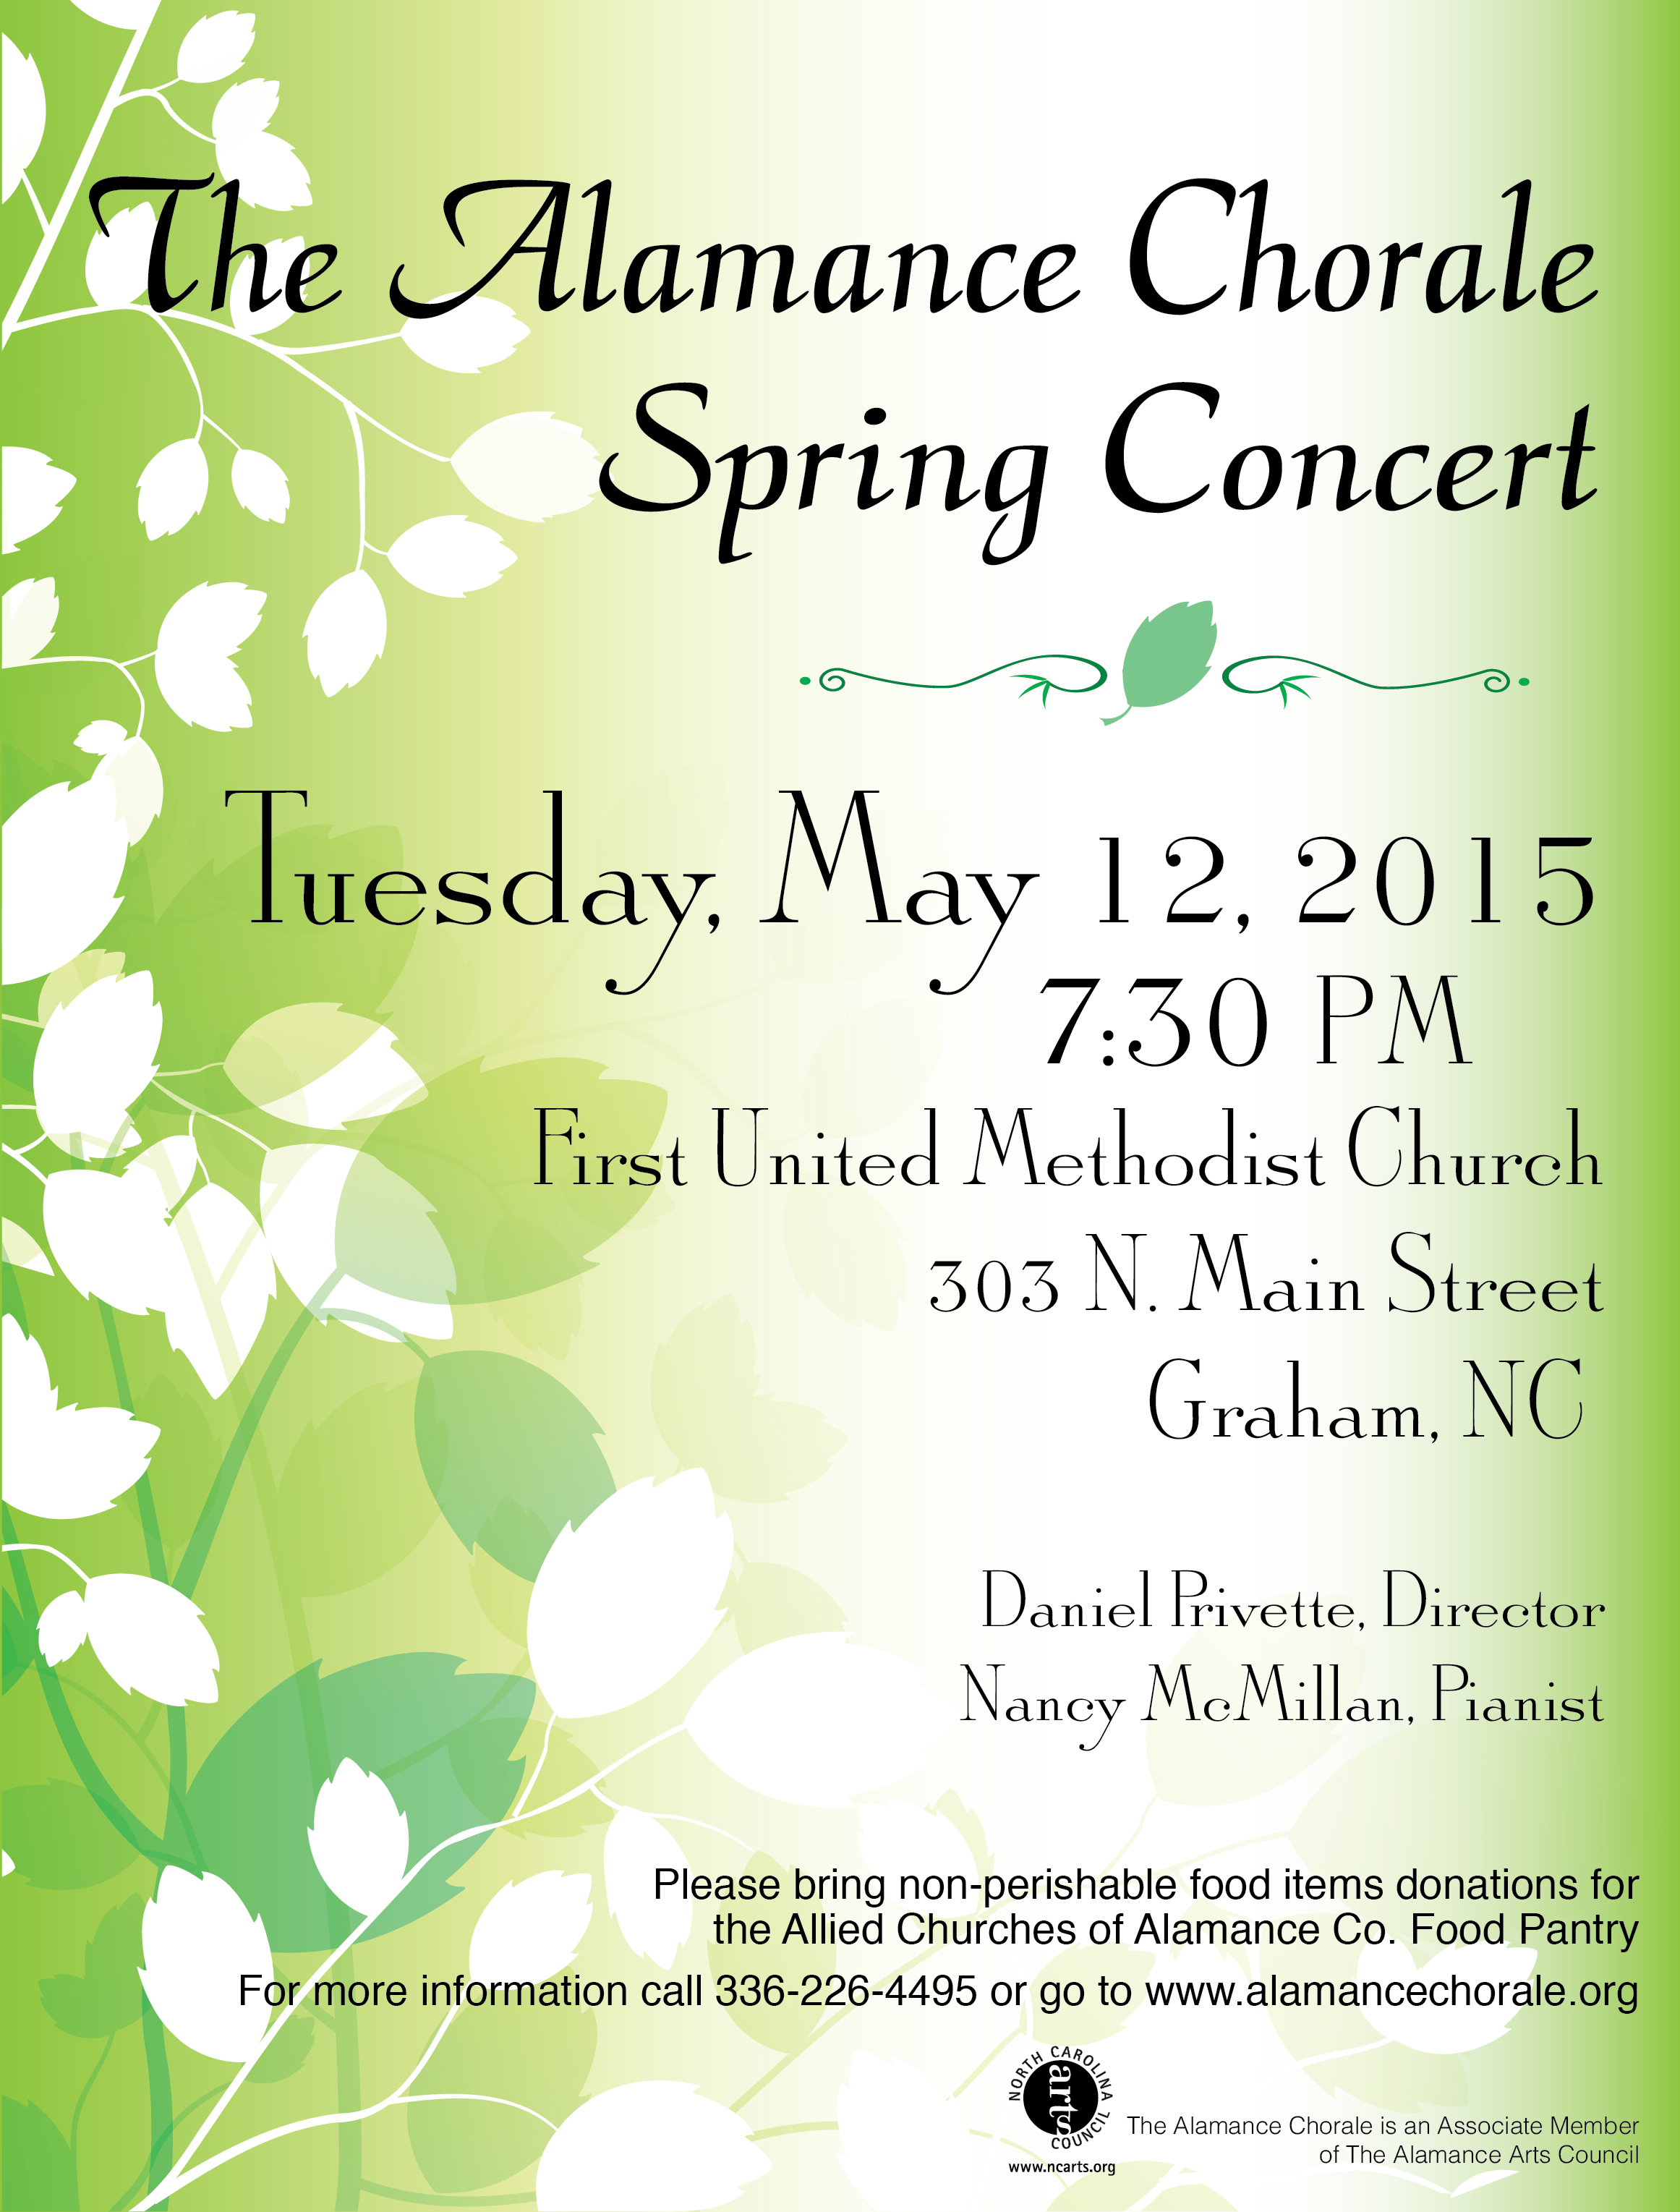 Alamance Chorale May 12, 2015 Spring Concert Flyer Graphic